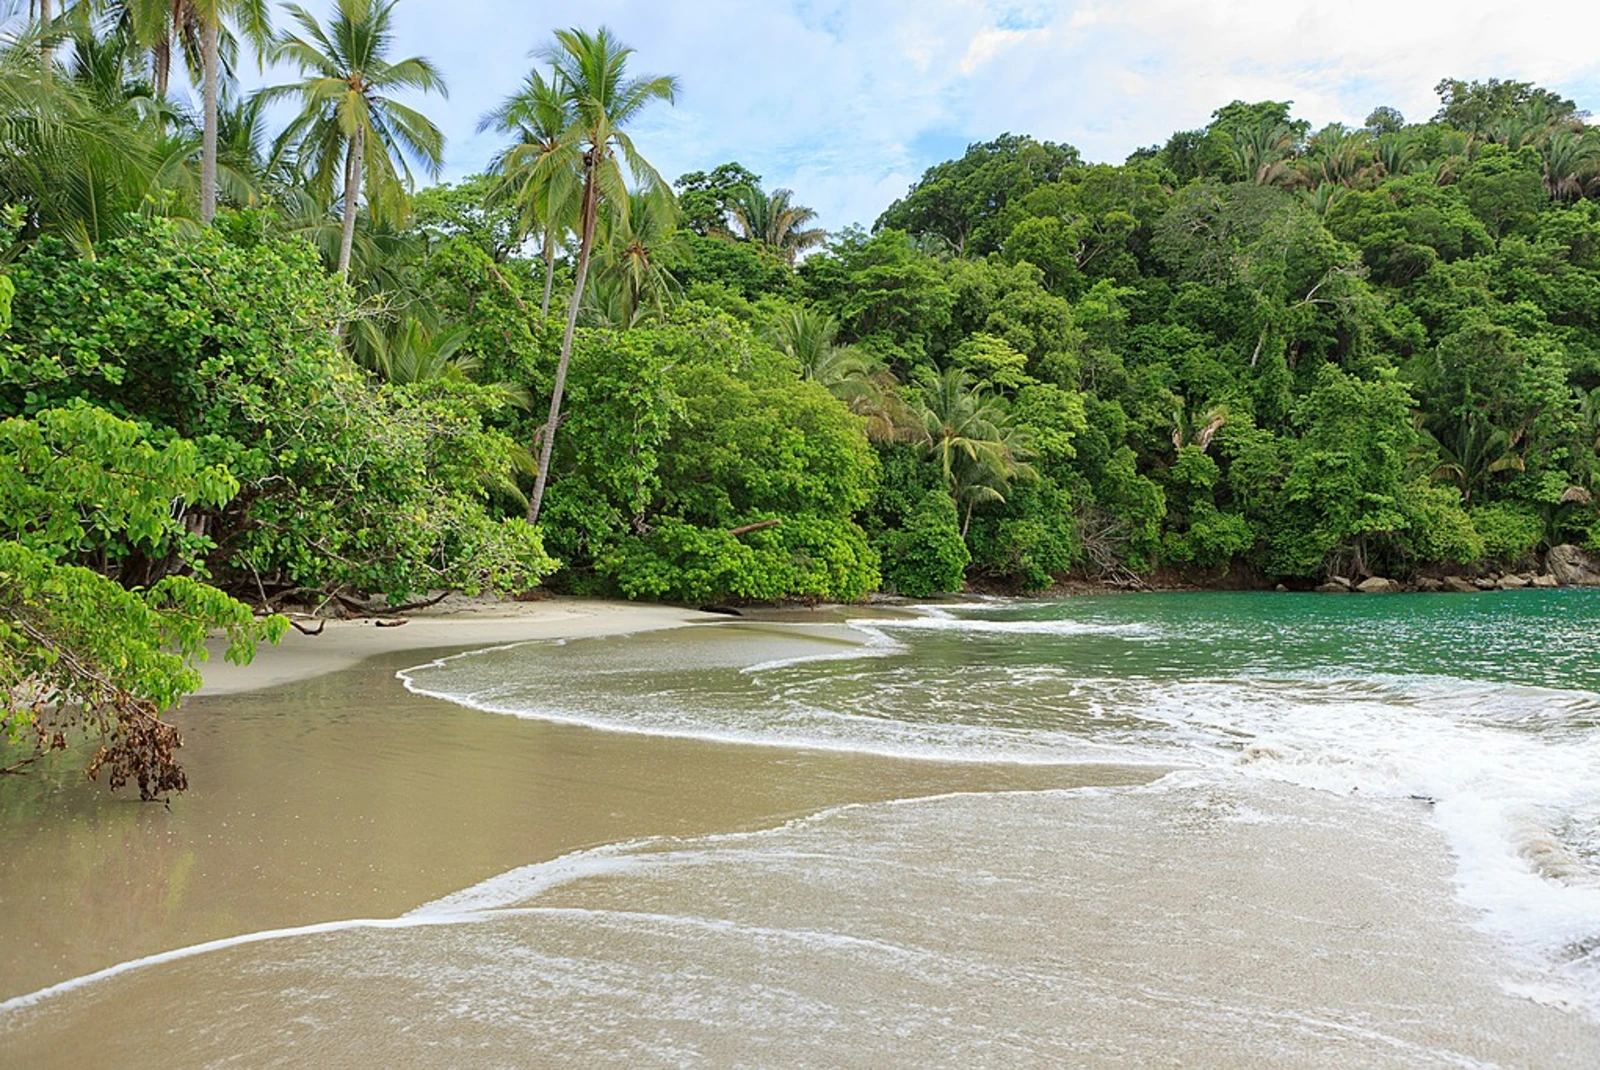 Manuel Antonio National Park with a beach and trees view